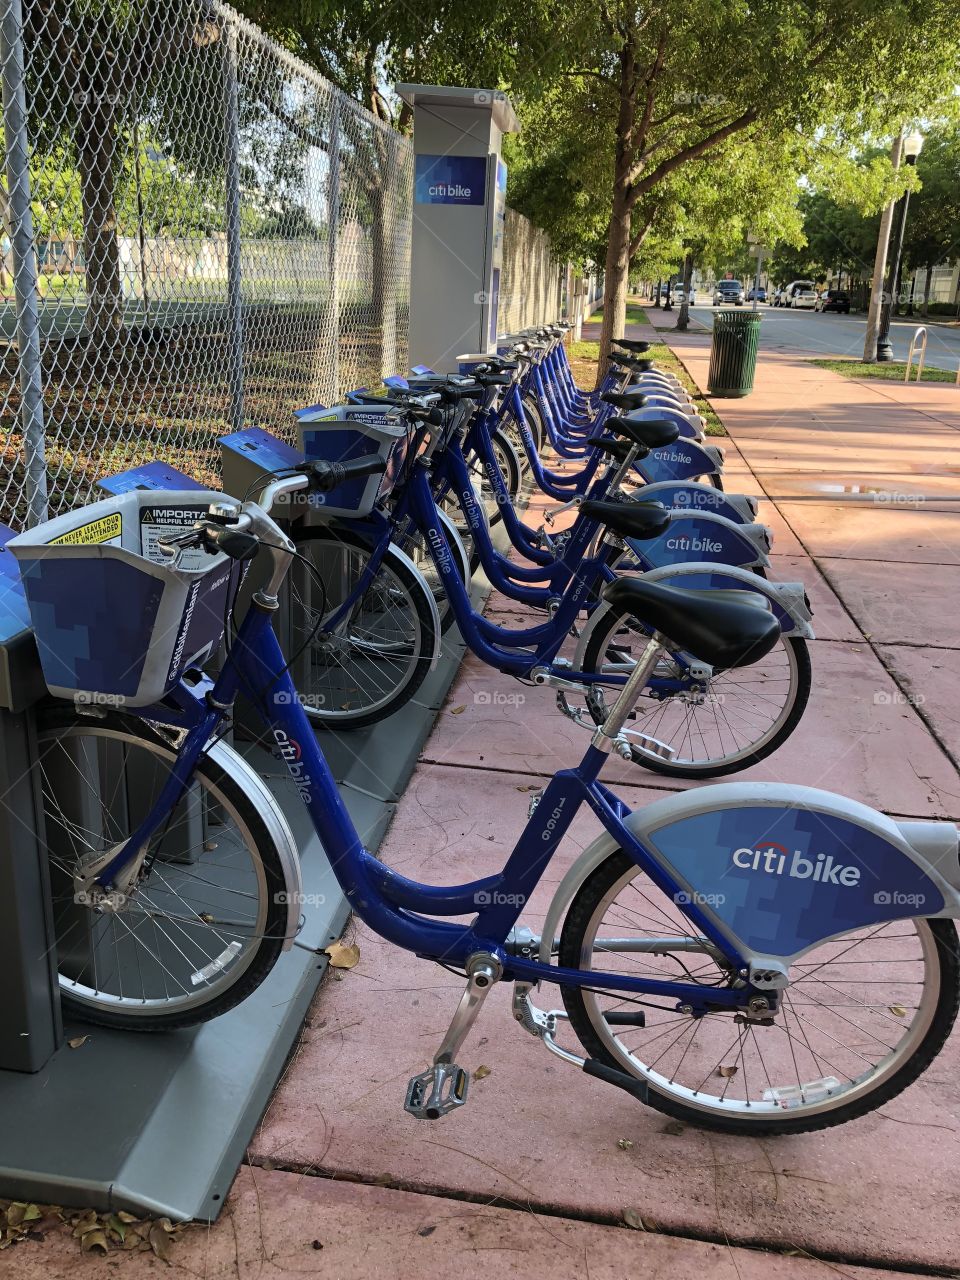 Citibike, thanks for taking me around town. 